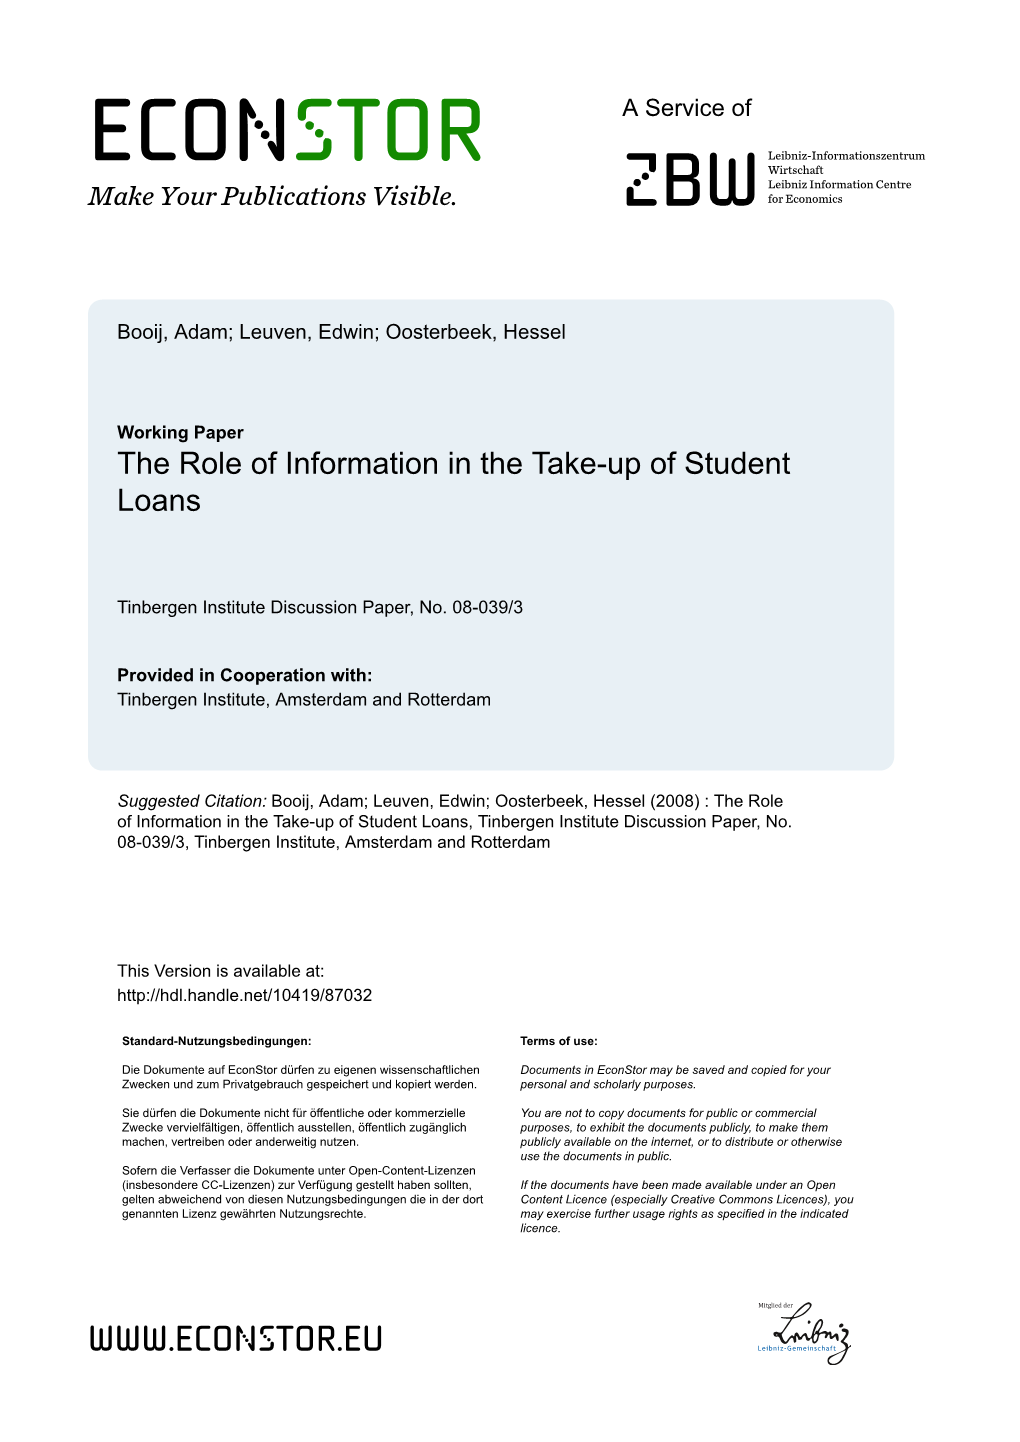 The Role of Information in the Take-Up of Student Loans